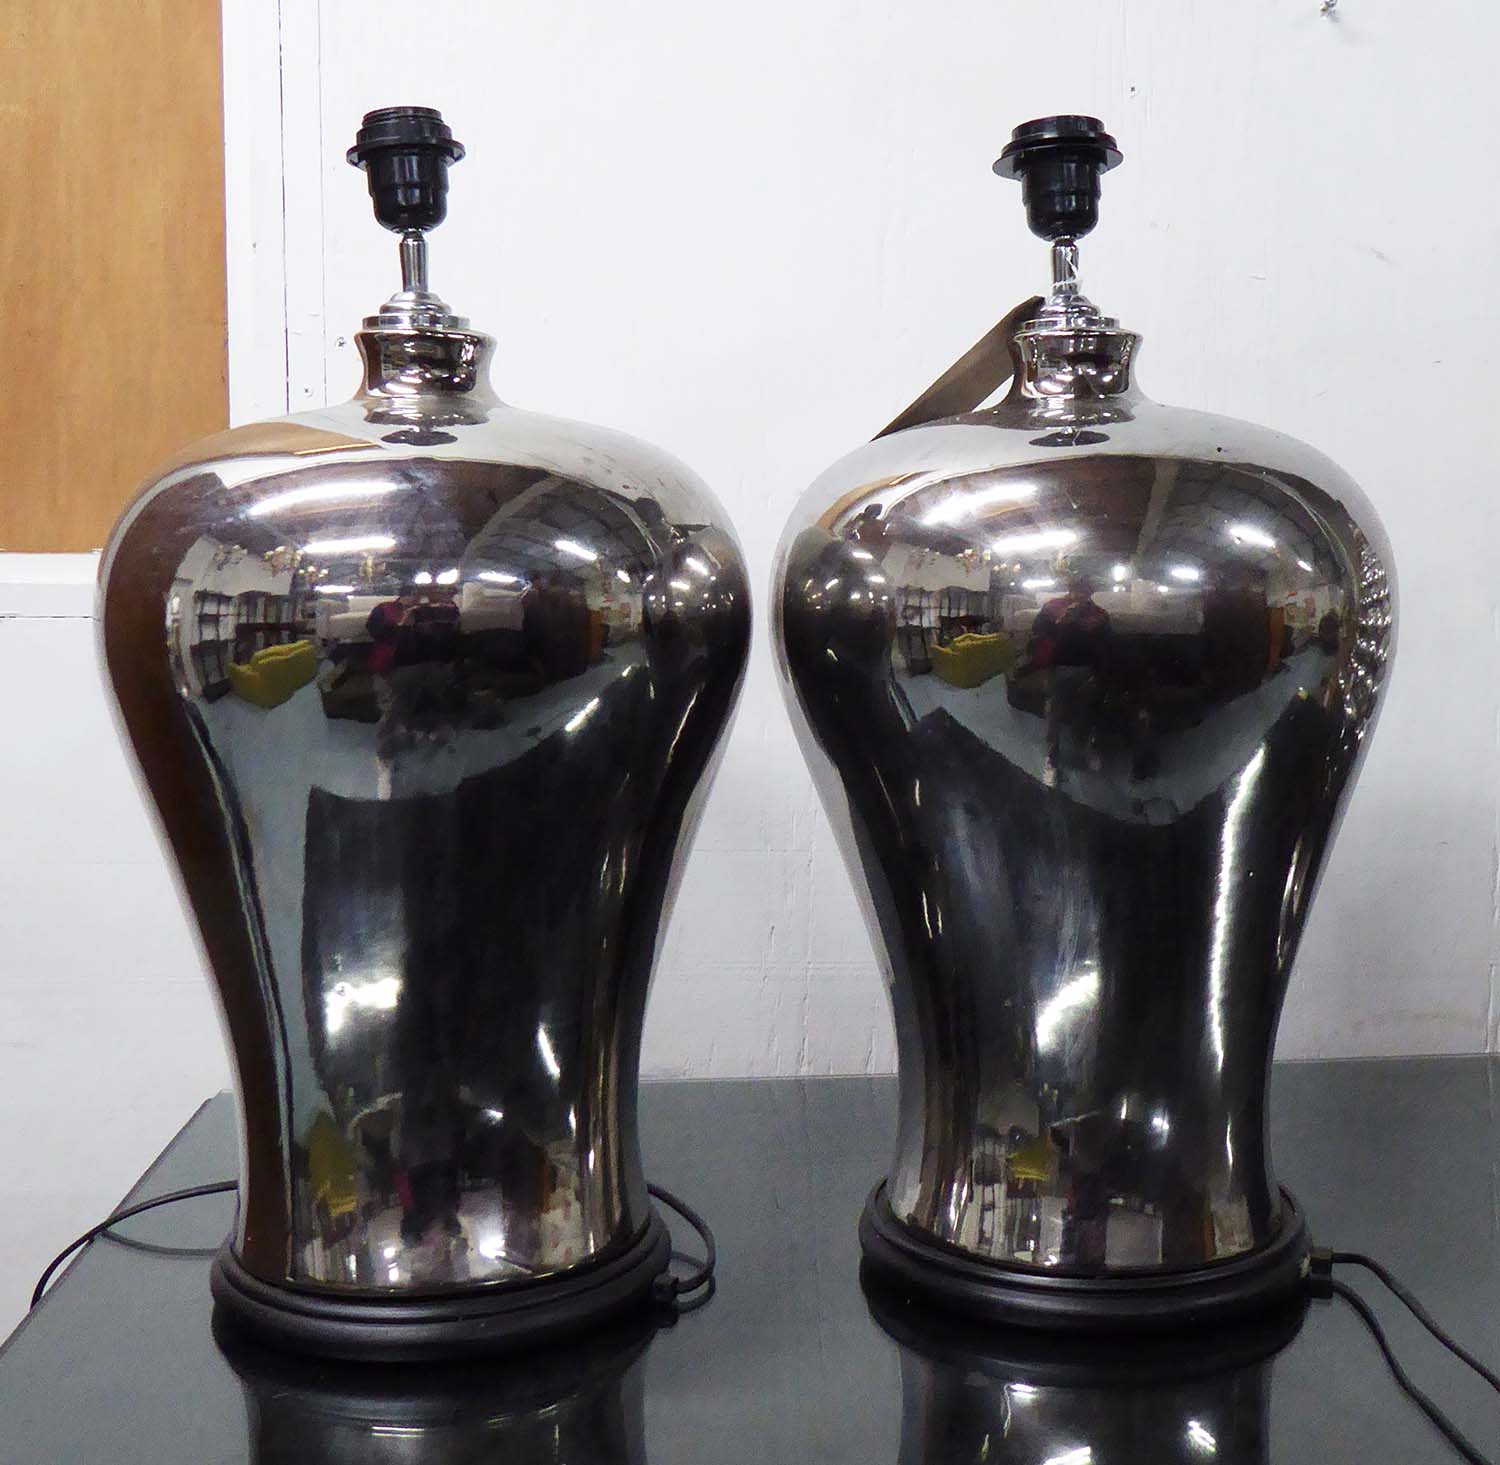 TABLE LAMPS, a pair, urn shaped, mirrored finish.